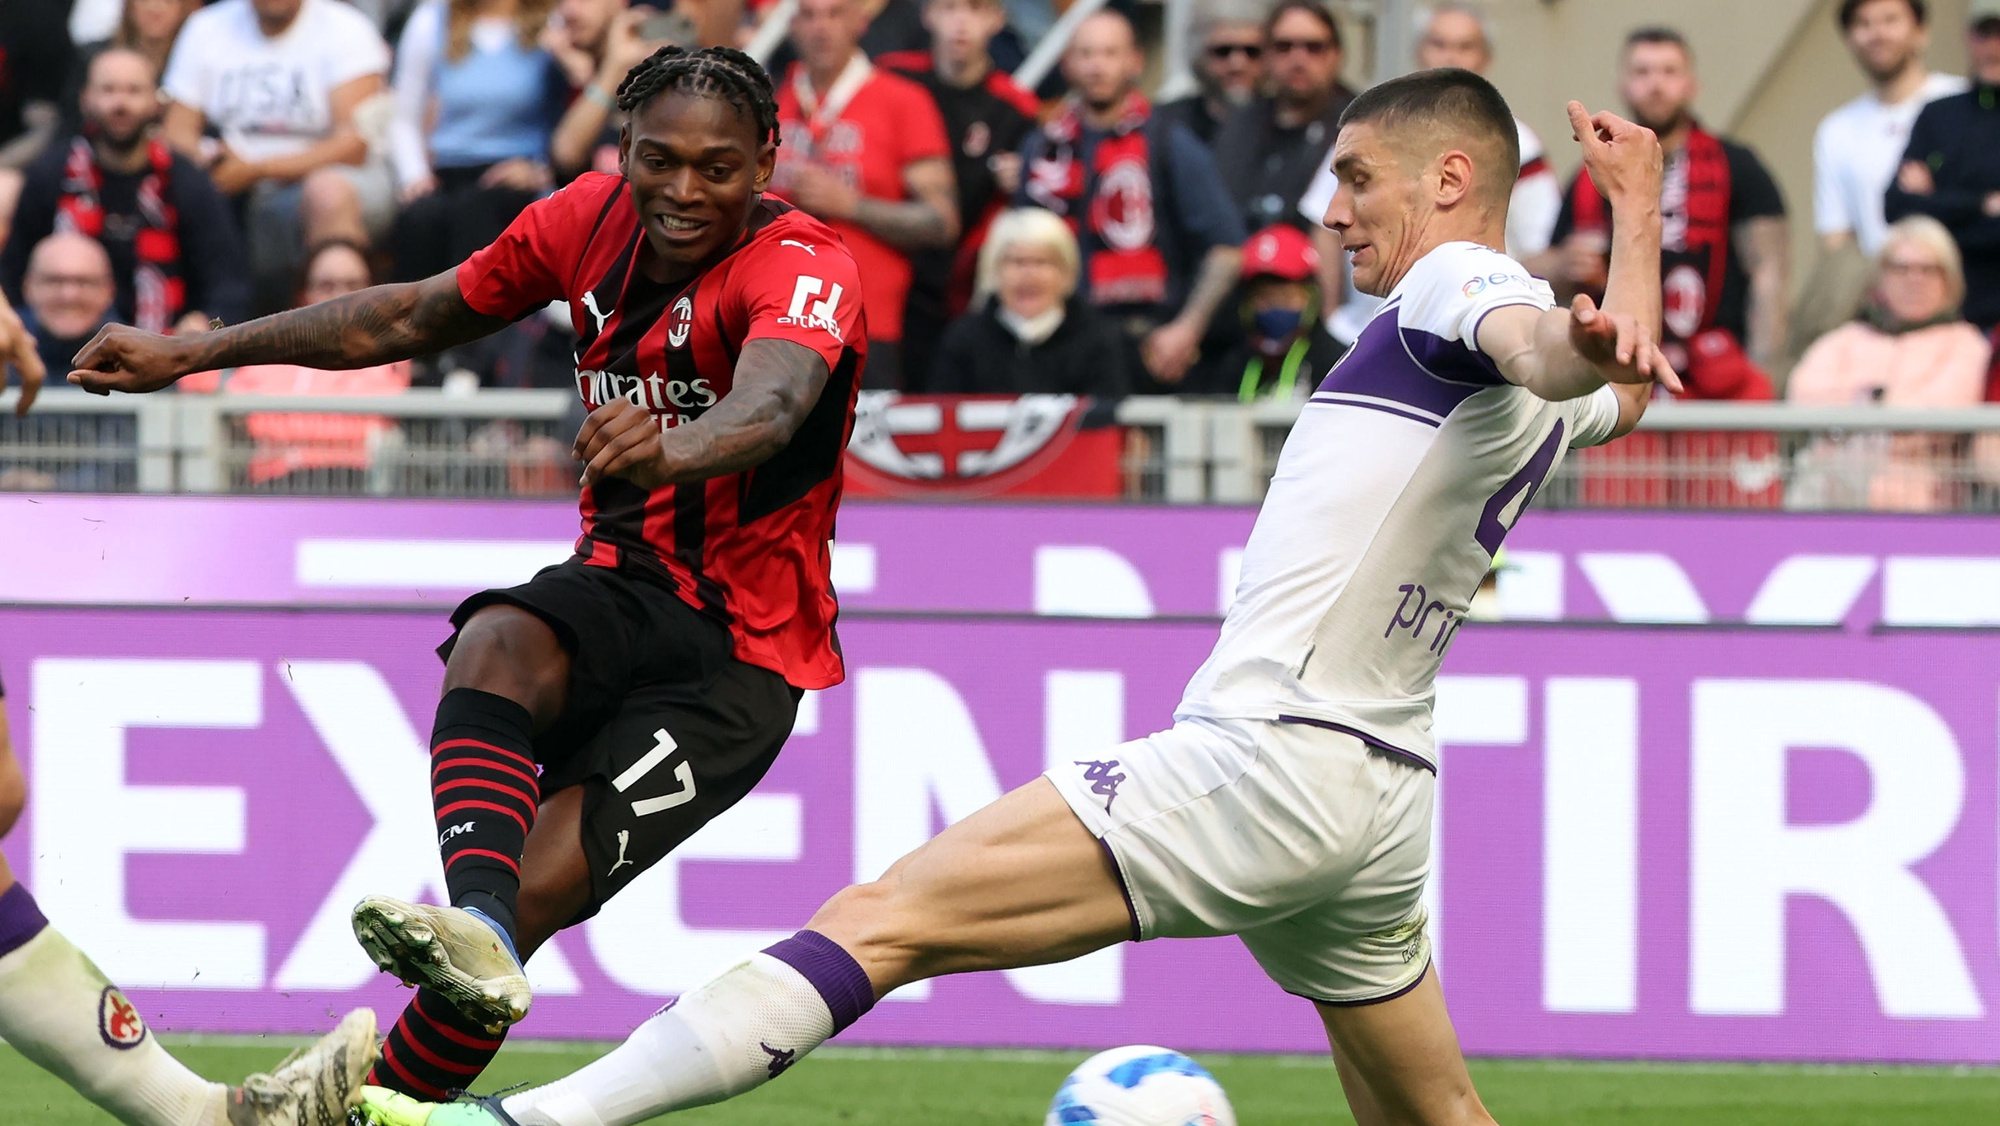 epa09920673 AC Milanâ€™s Rafael Leao (L) scores the 1-0 goal during the Italian Serie A soccer match between AC Milan and Fiorentina at Giuseppe Meazza stadium in Milan, Italy, 01 May 2022.  EPA/MATTEO BAZZI